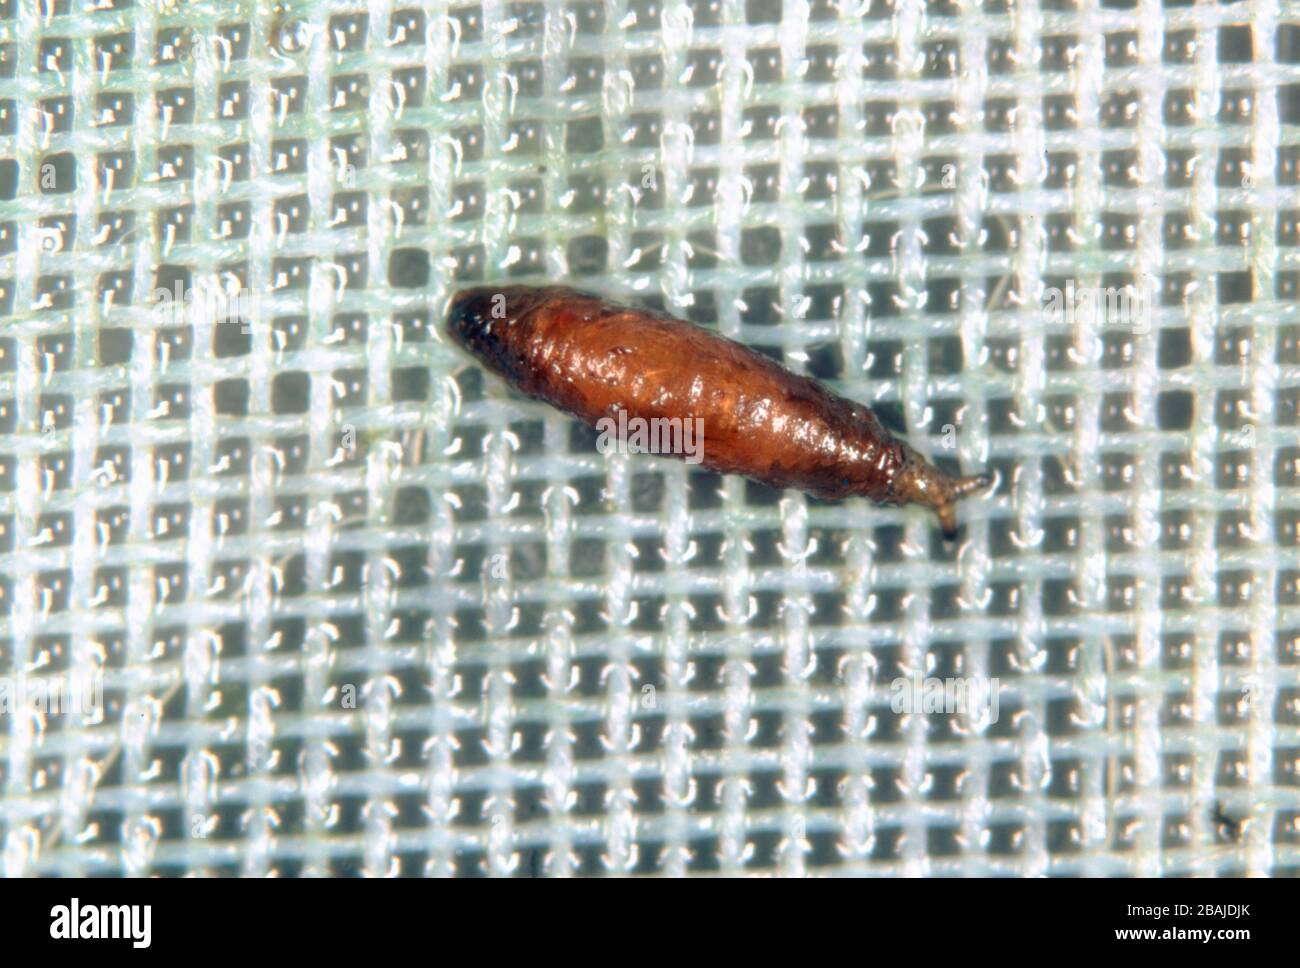 Shore fly or fungus fly (Scatella stagnalis) pupa on glasshouse mesh. Shore flies contaminate lettuce crops Stock Photo